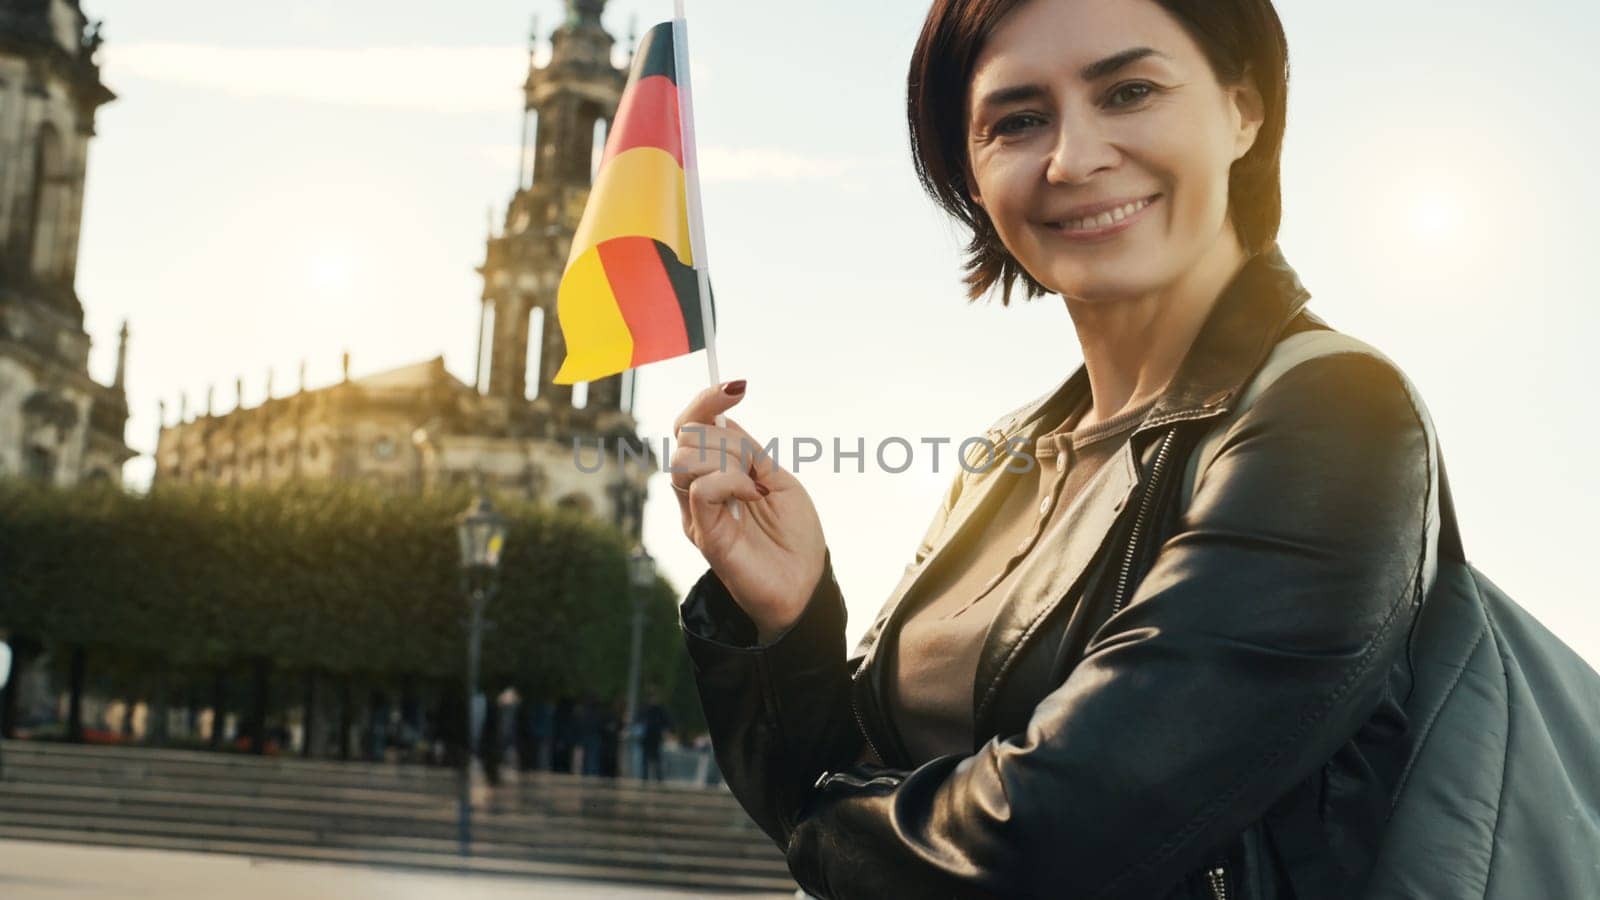 Young Woman Smiles With German Flag In Hand, Against Blurred City Backdrop In Autumn